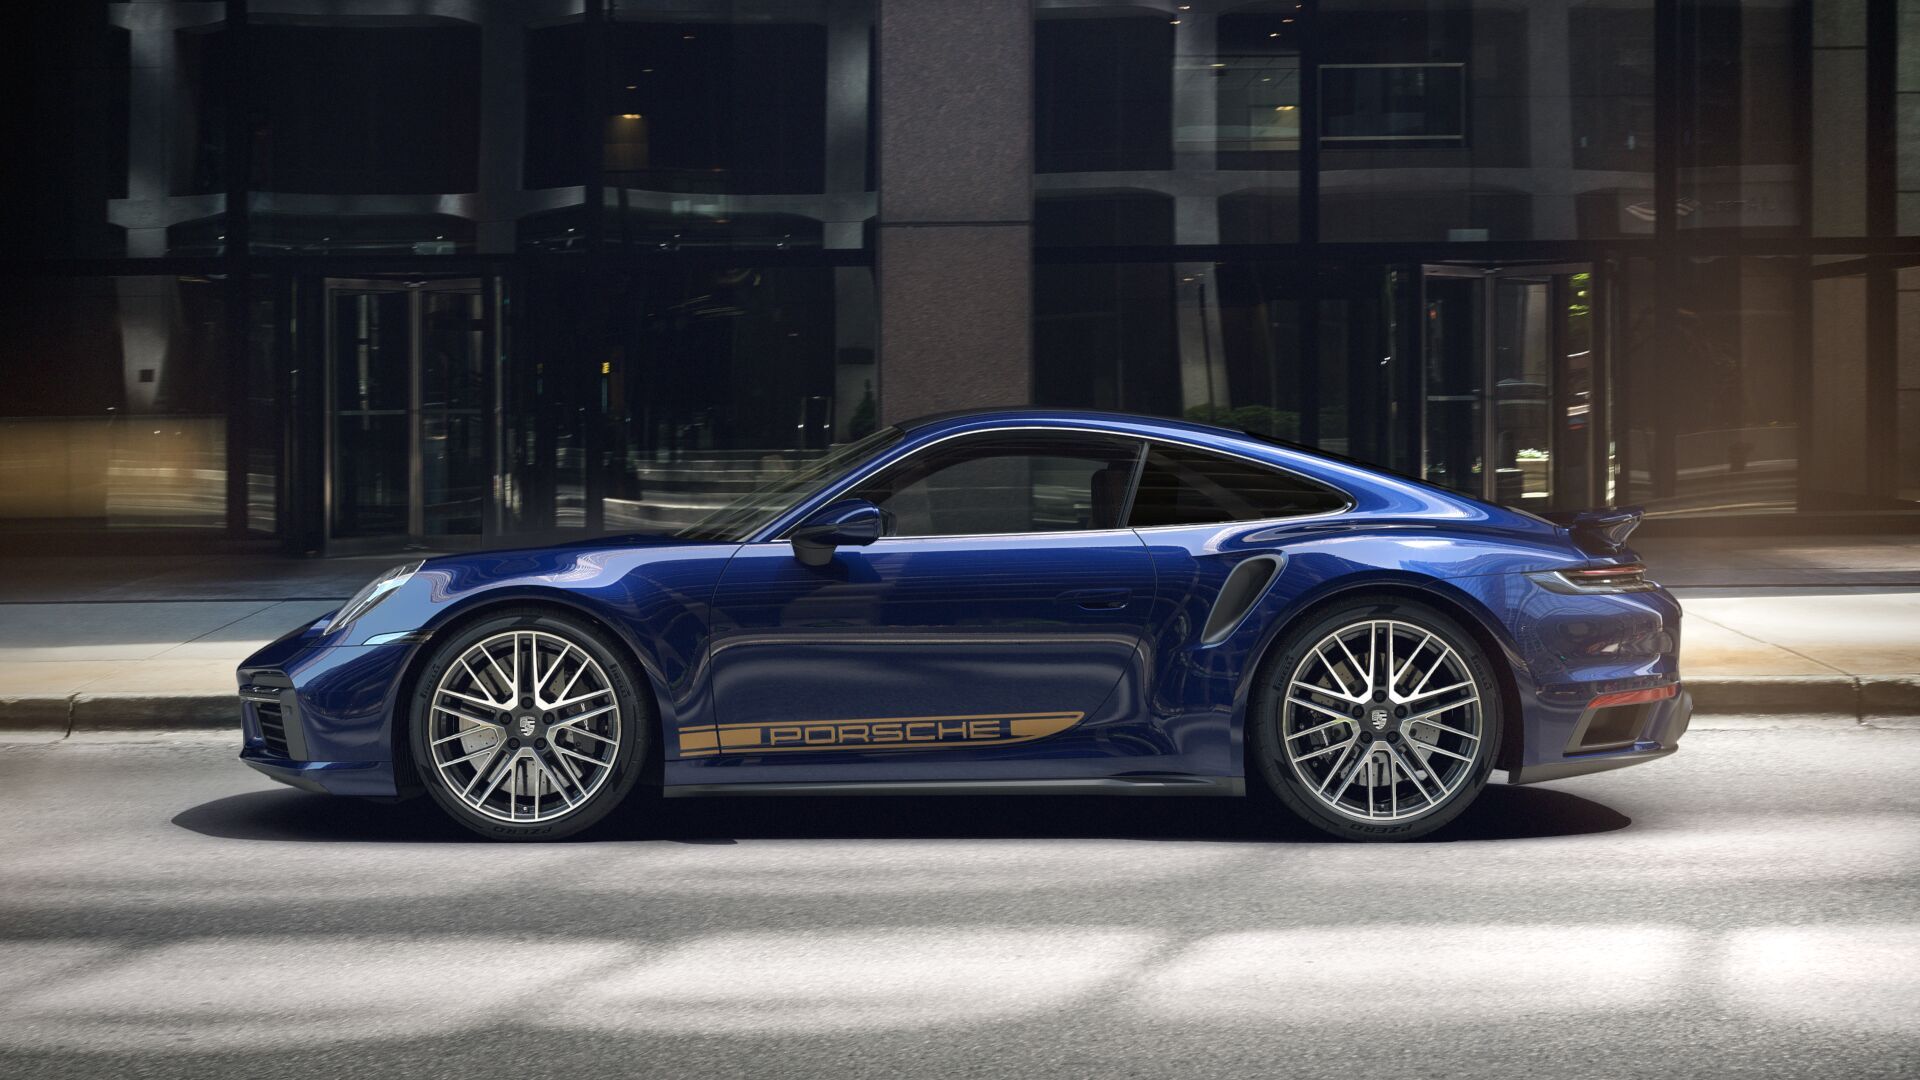 Side view of blue Porsche 911 Turbo S parallel to glass-fronted building